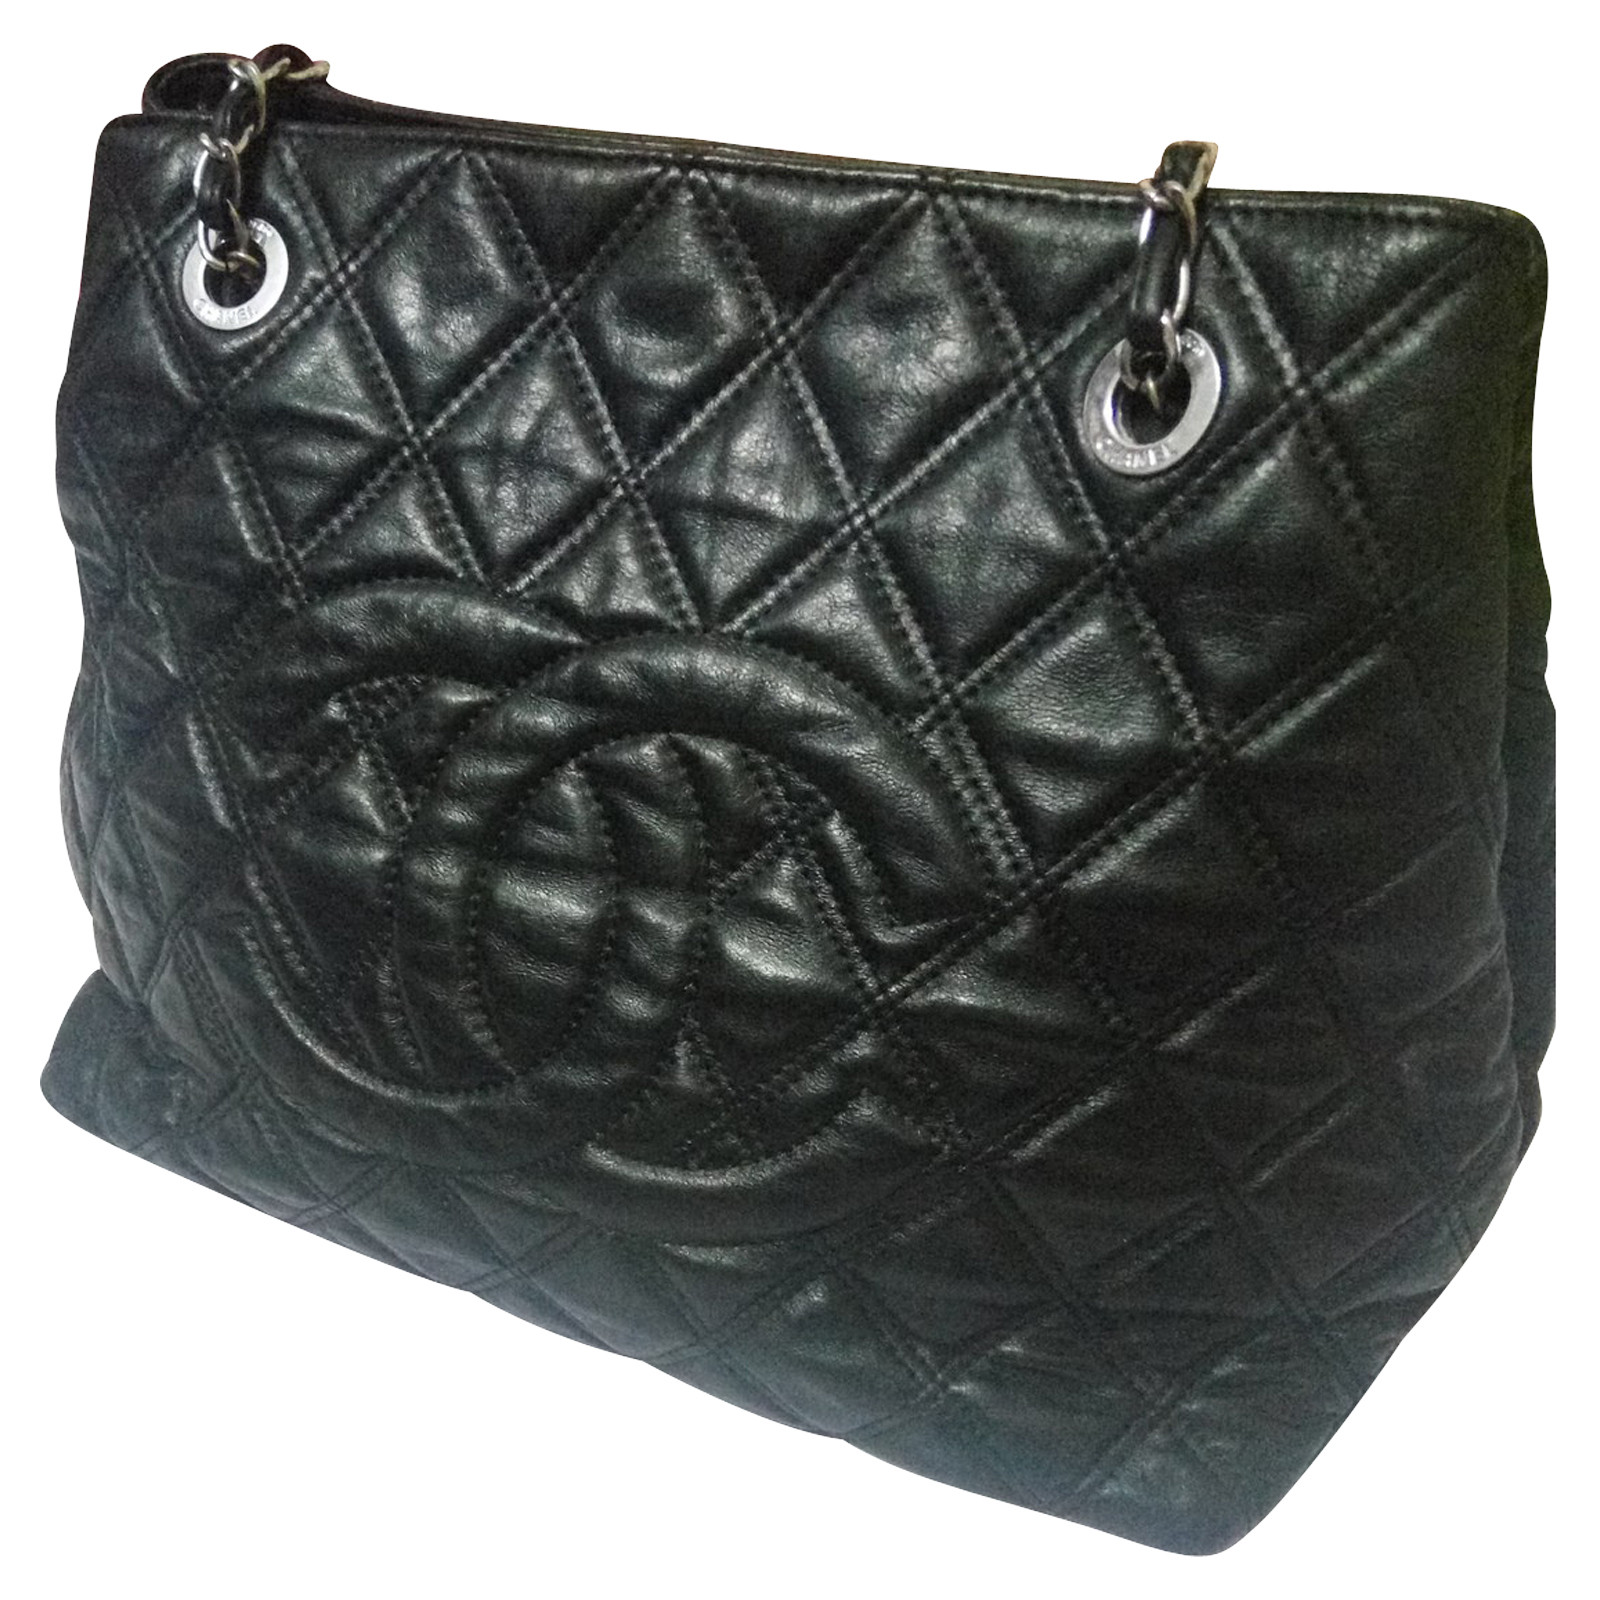 Chanel Chanel Gst Vintage Second Hand Chanel Chanel Gst Vintage Acquista Di Seconda Mano A 1800